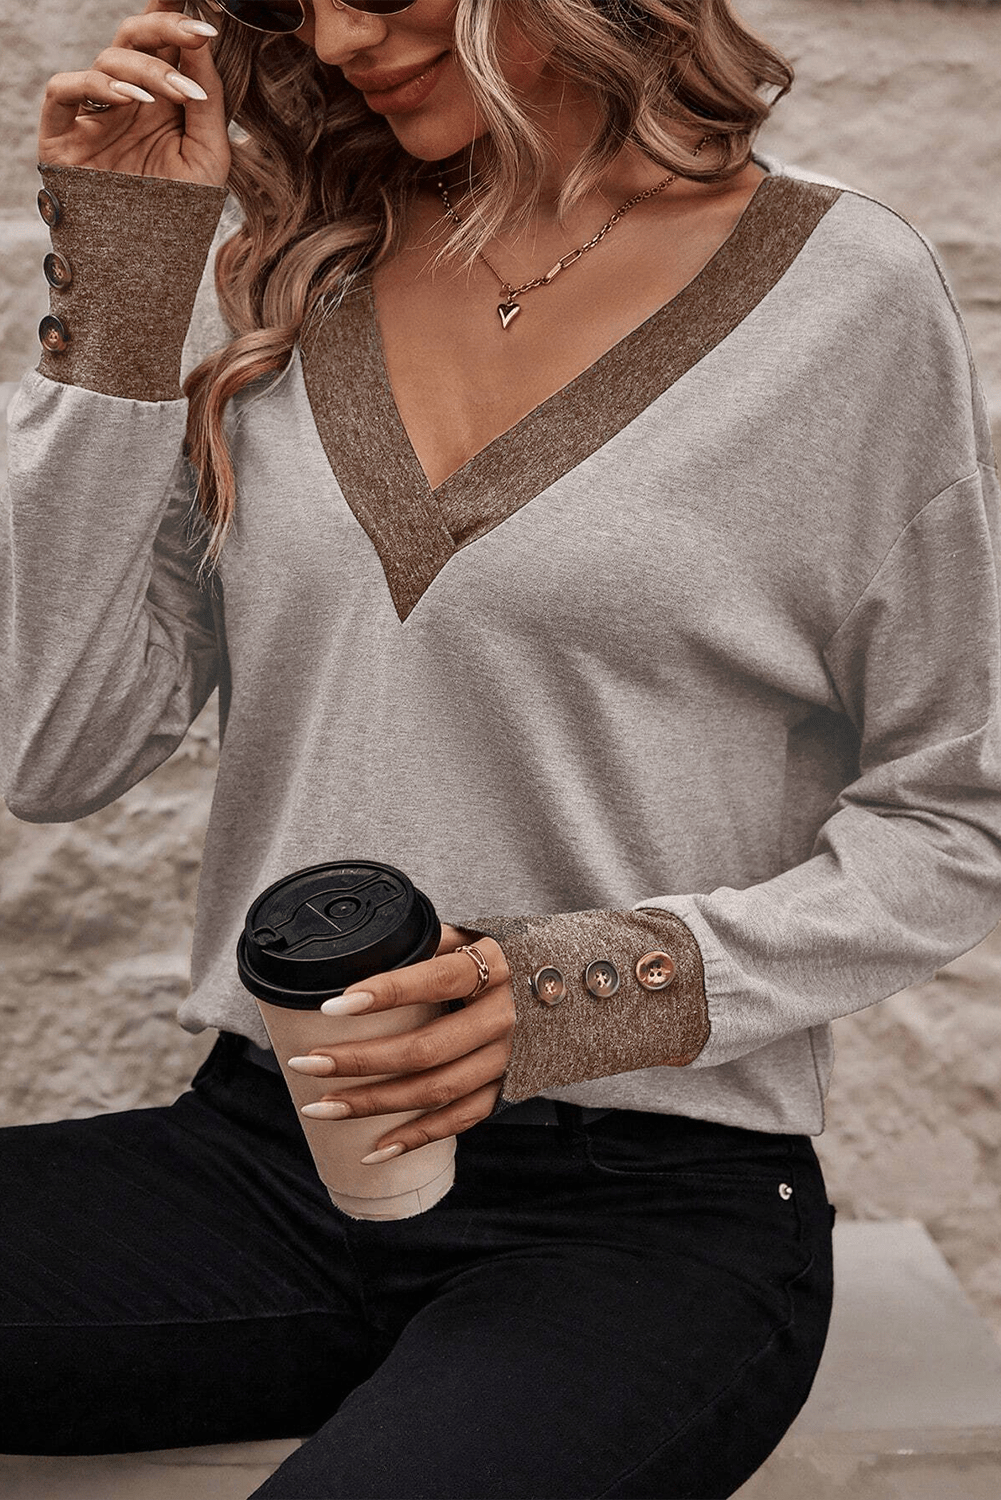 The802Gypsy  Tops Traveling Gypsy Cuffed Long Sleeve Top